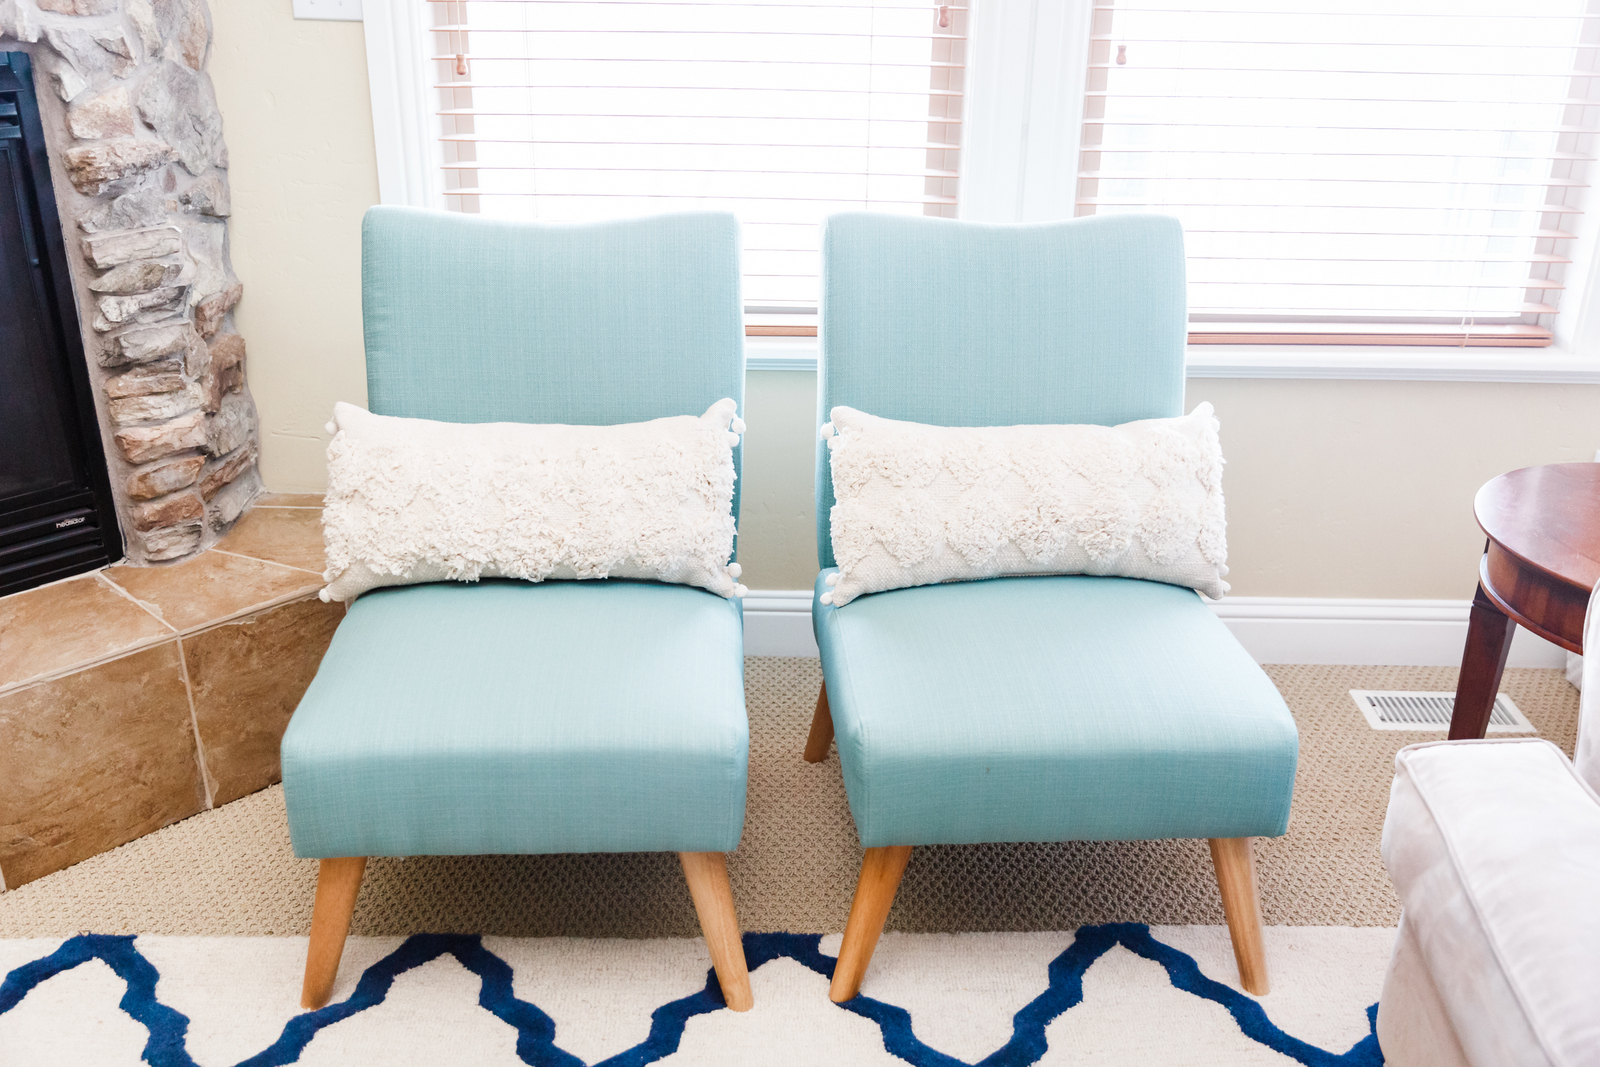 Living Room Update with Kohl's Accent Chairs